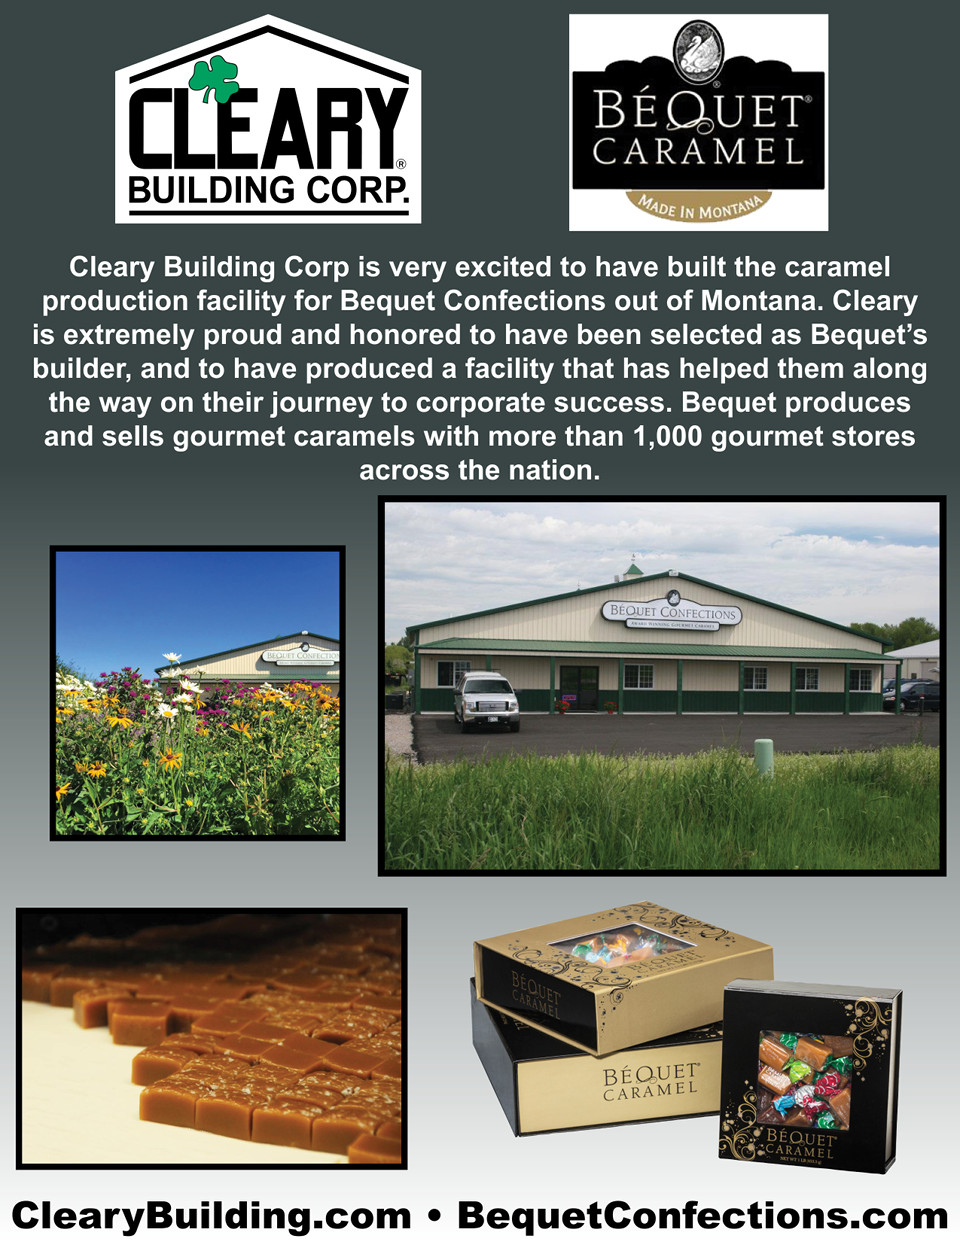 Cleary Building Corp. is excited to have built the caramel production facility for Bequet Confections in Montana.